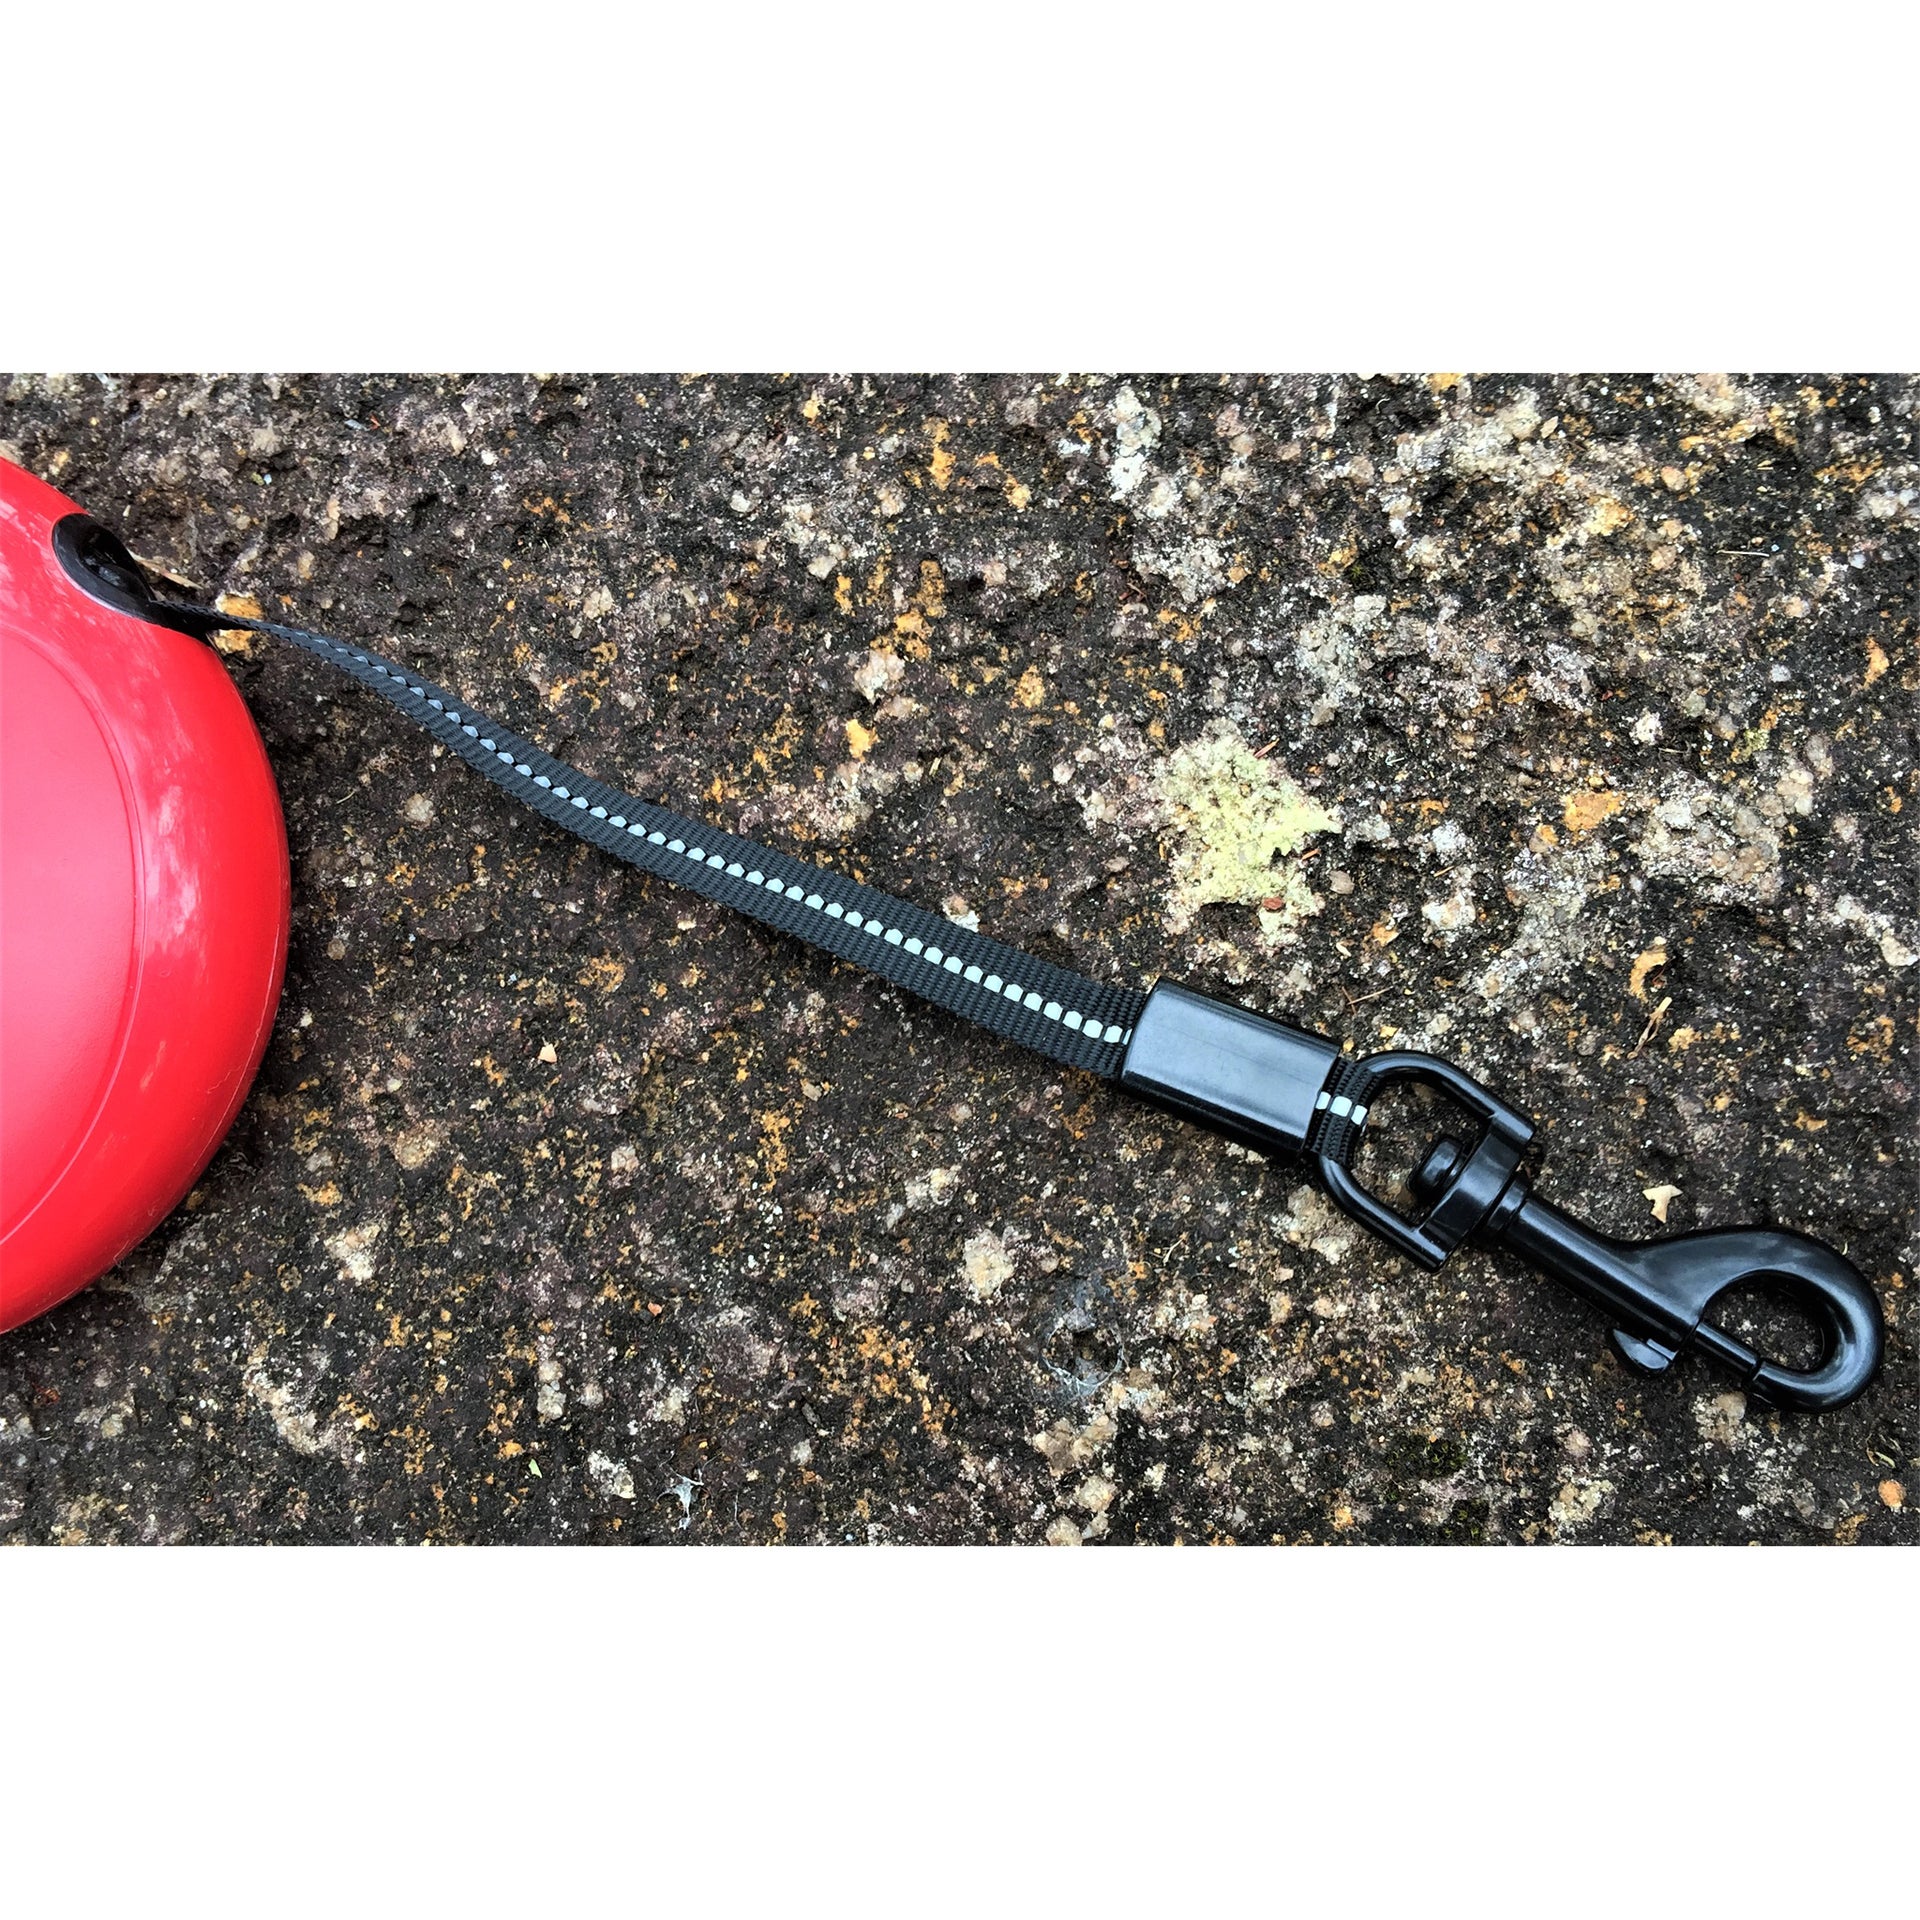 Retractable Leash Red Tape Outdoors